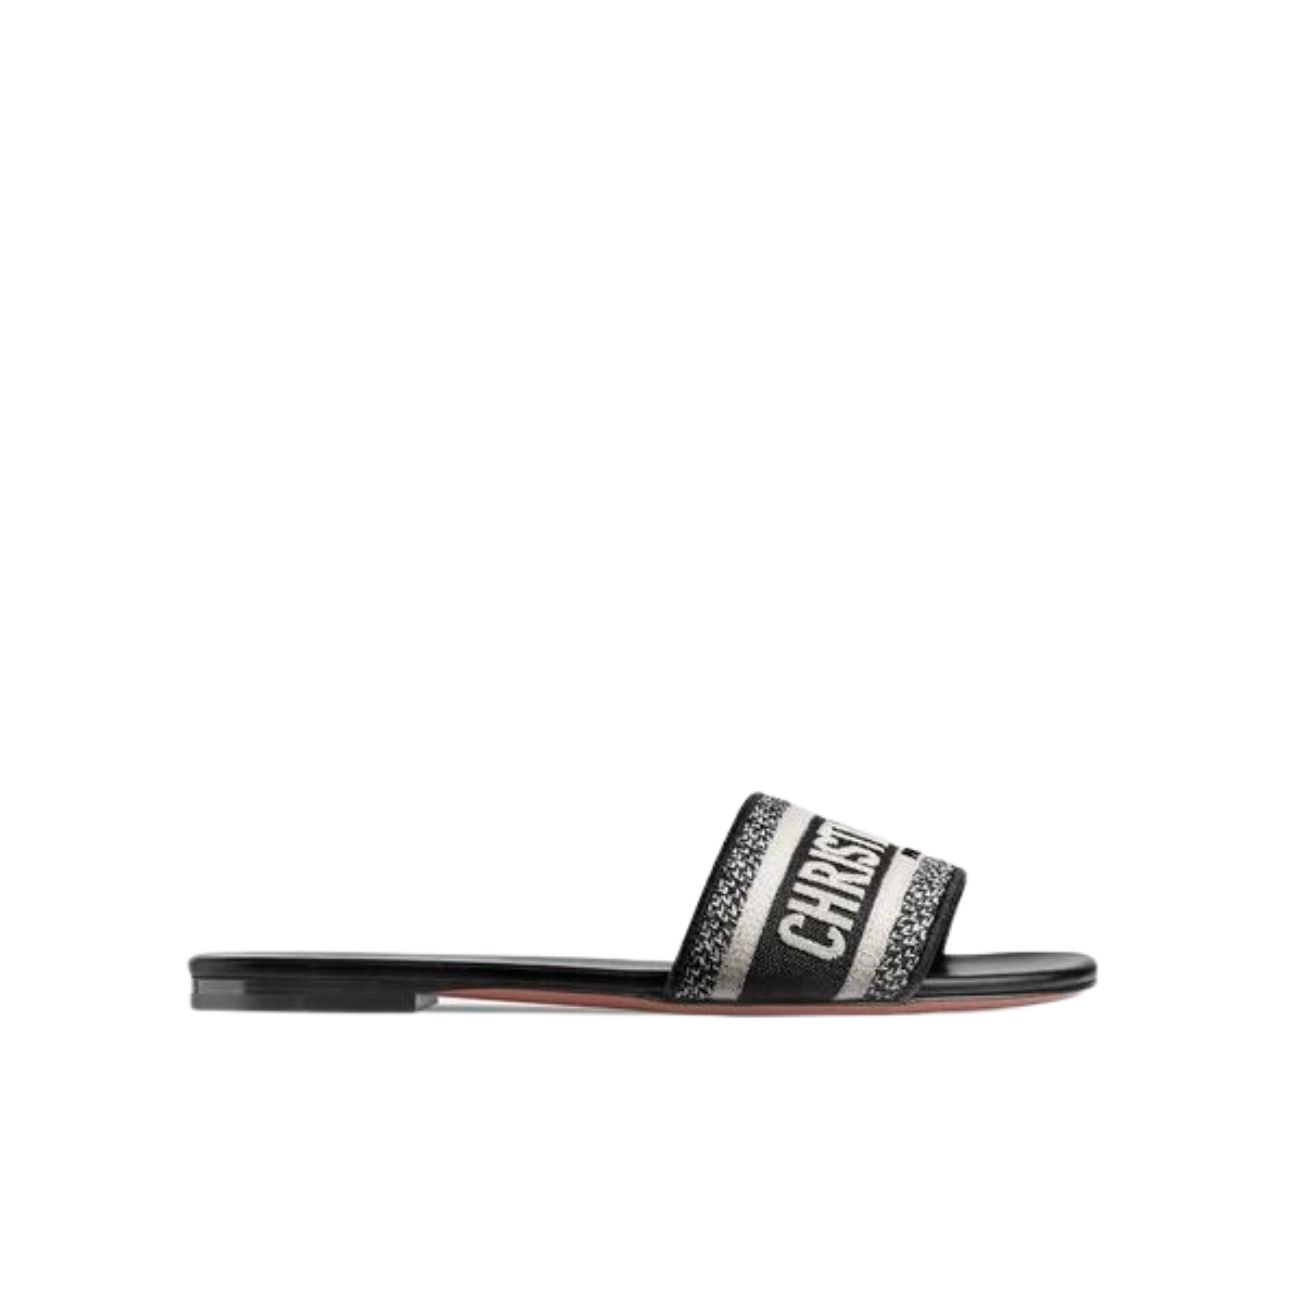 https://d2cva83hdk3bwc.cloudfront.net/dior-dior-dway-slide-black-and-white-embroidered-cottonfoeah-1.jpg